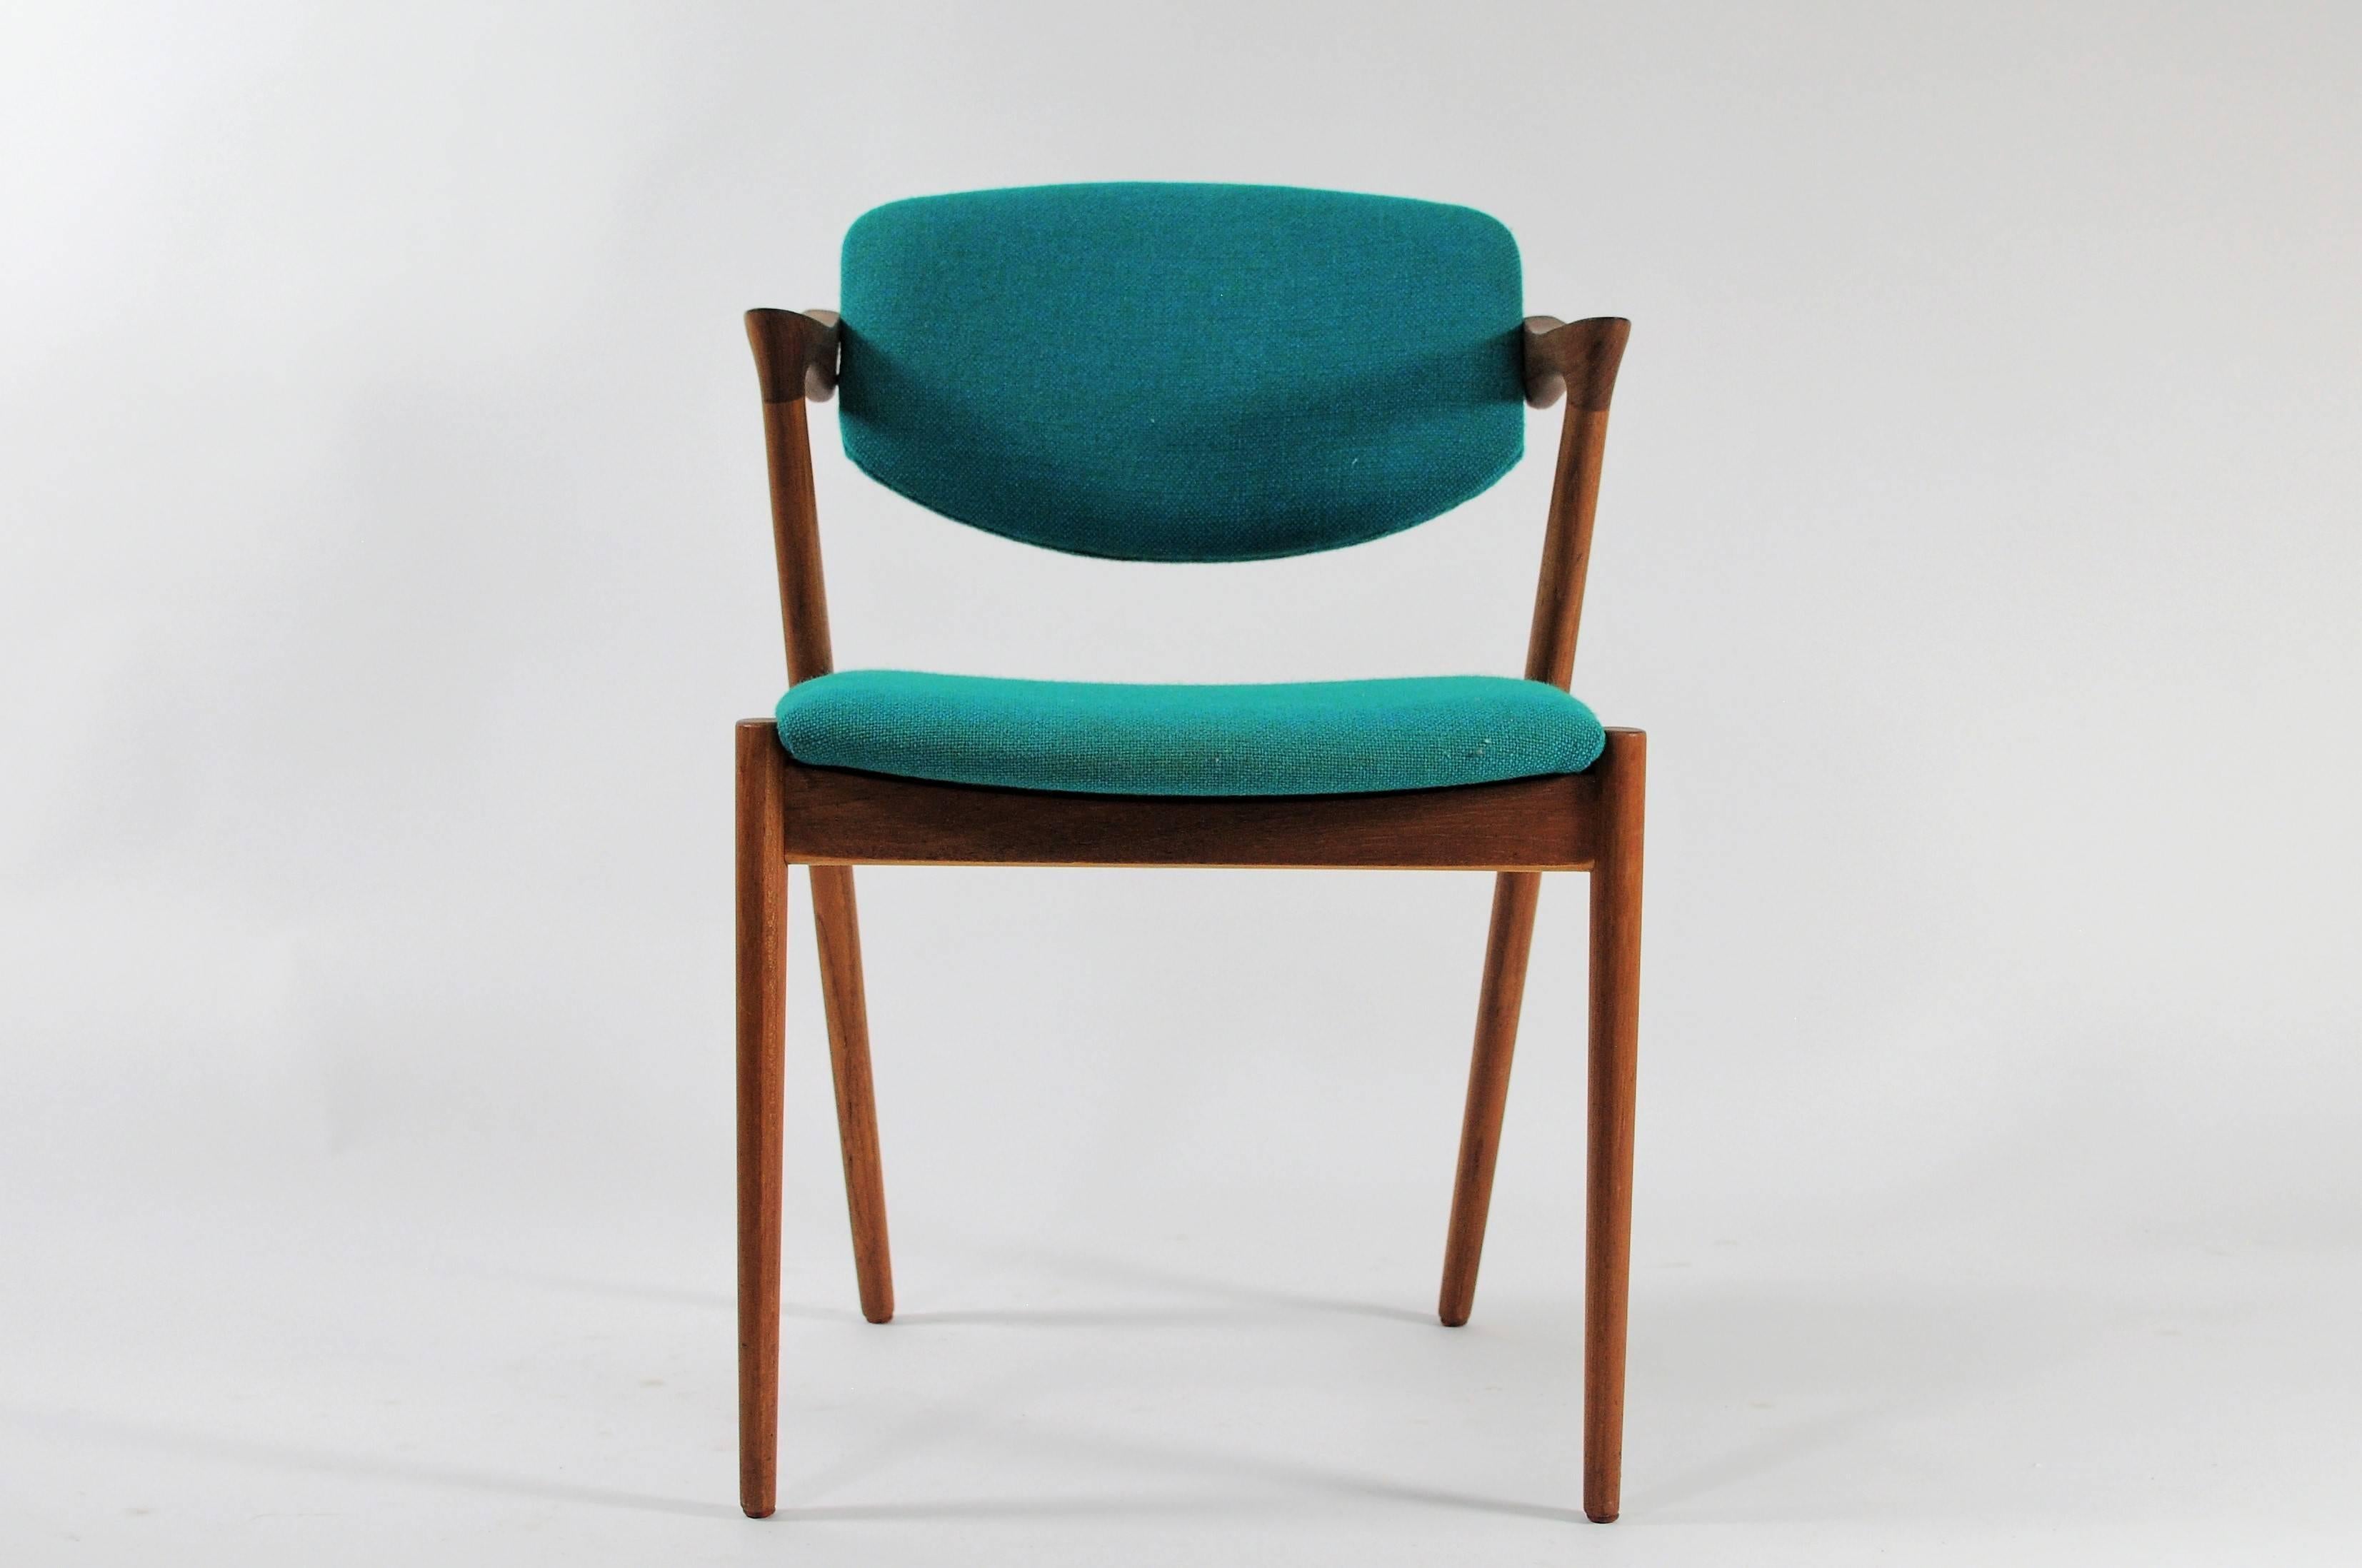 Set of twelve fully restored, 1960s teak dining chairs by Kai Kristiansen for Schous Møbelfabrik.

The chairs have Kai Kristiansens typical light and elegant design that make them fit in easily where you want them in your home - a design that was so